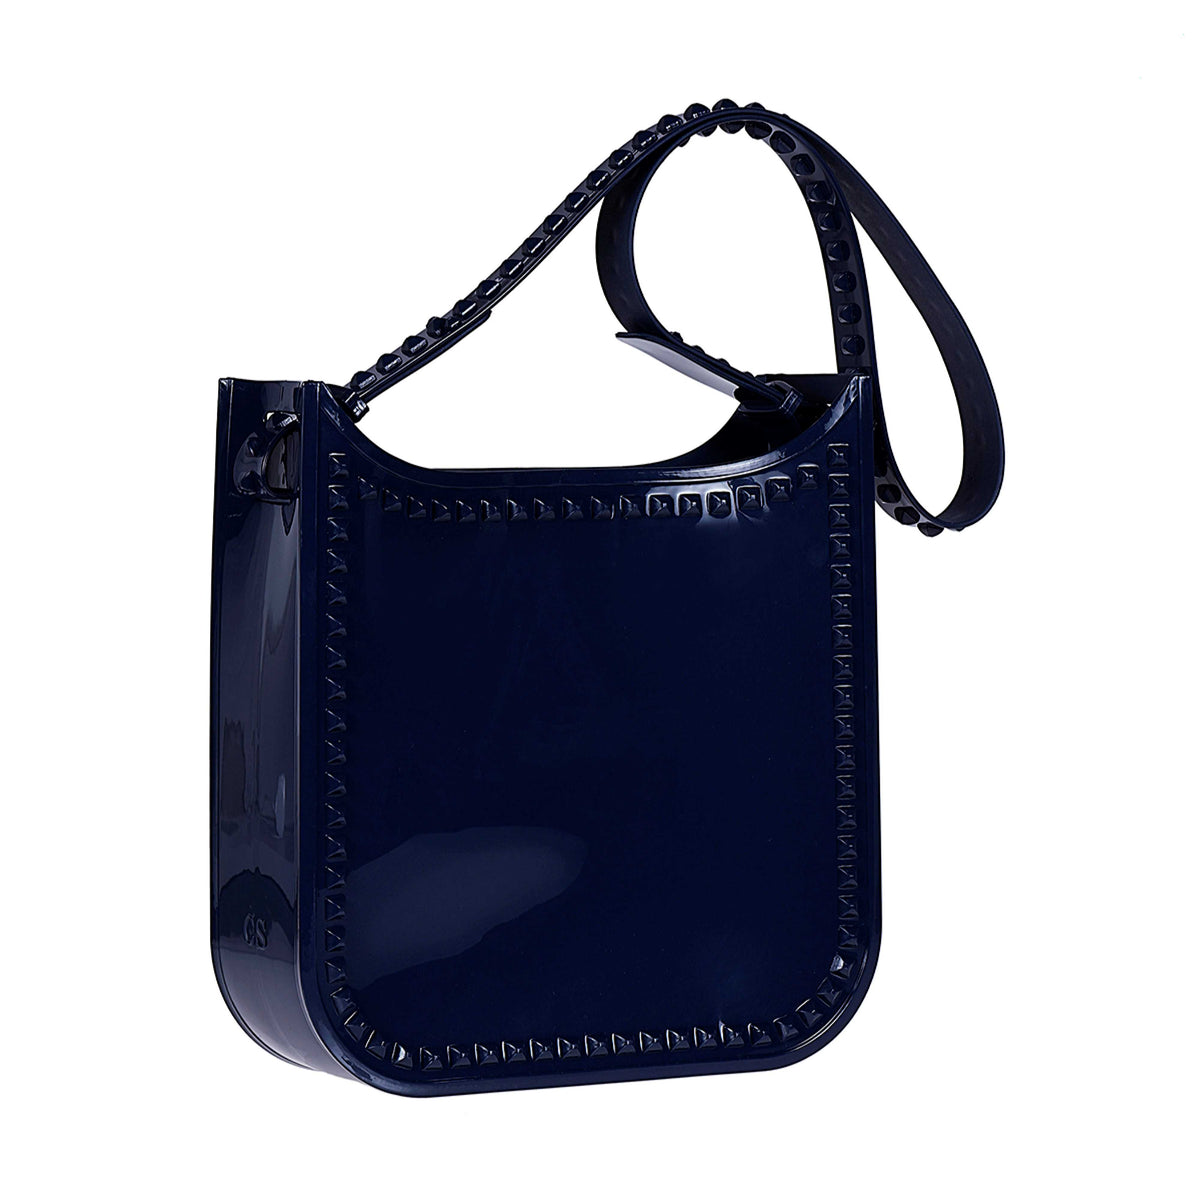 jelly tote beach bag in color navy blue with studs